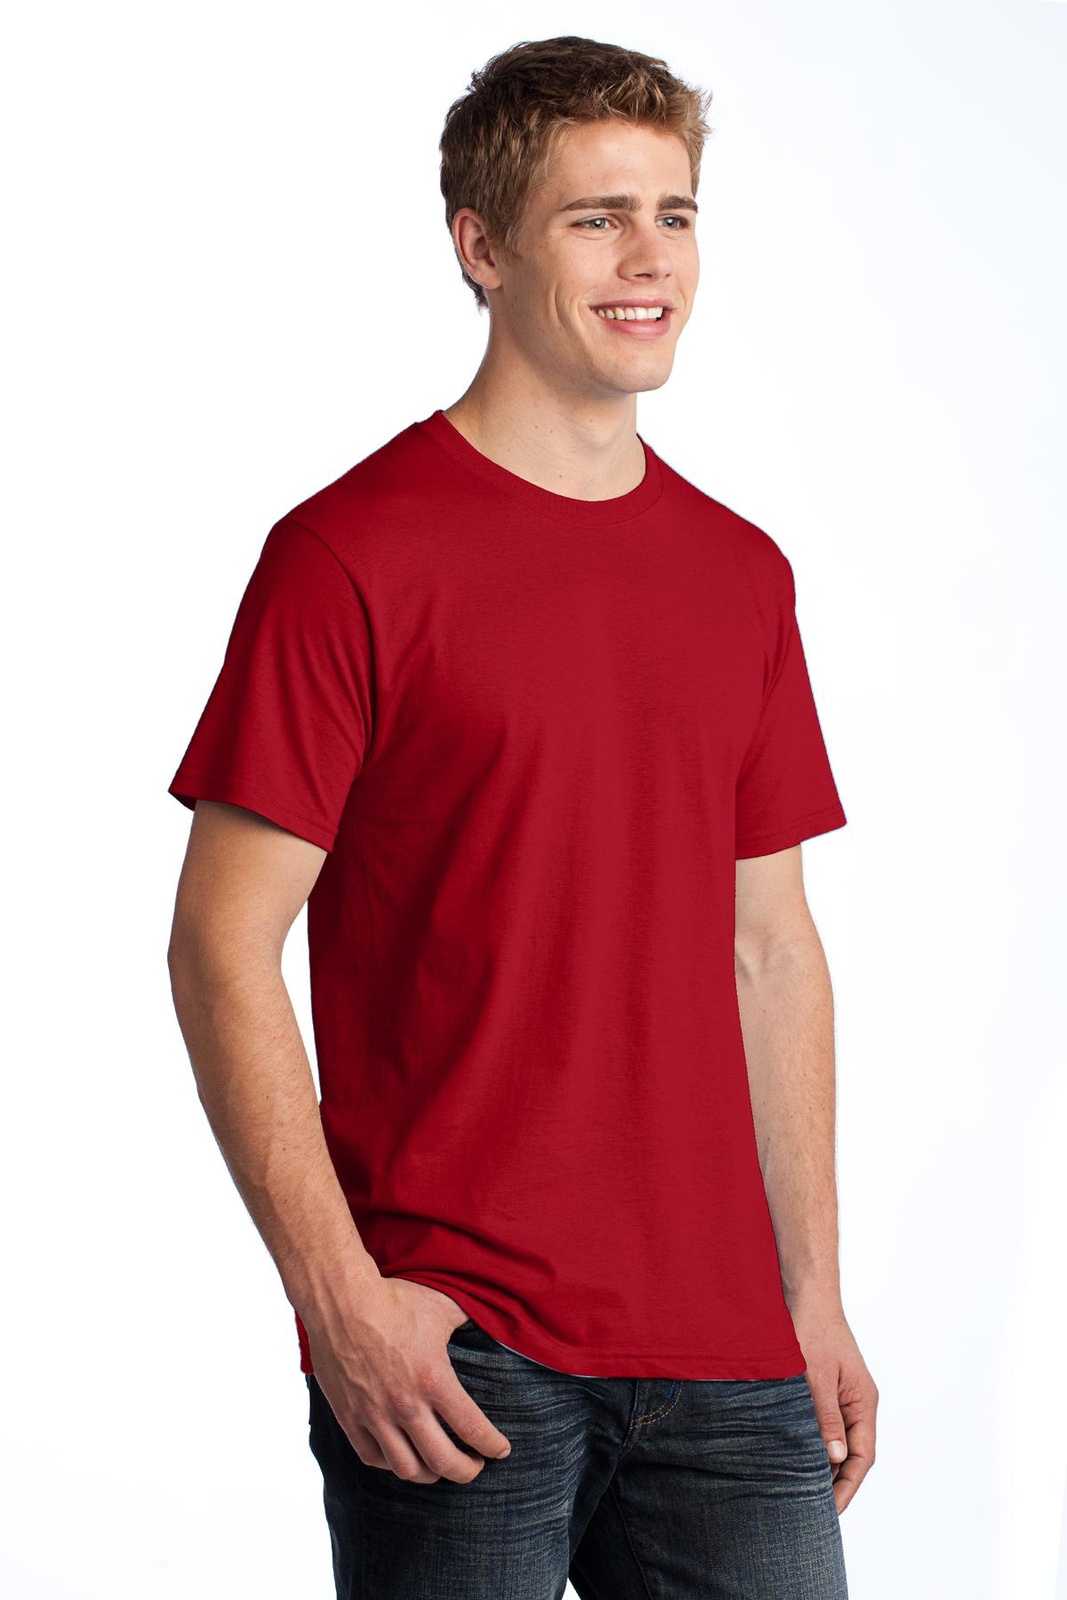 Fruit of the Loom 3930 HD Cotton 100% Cotton T-Shirt - True Red - HIT a Double